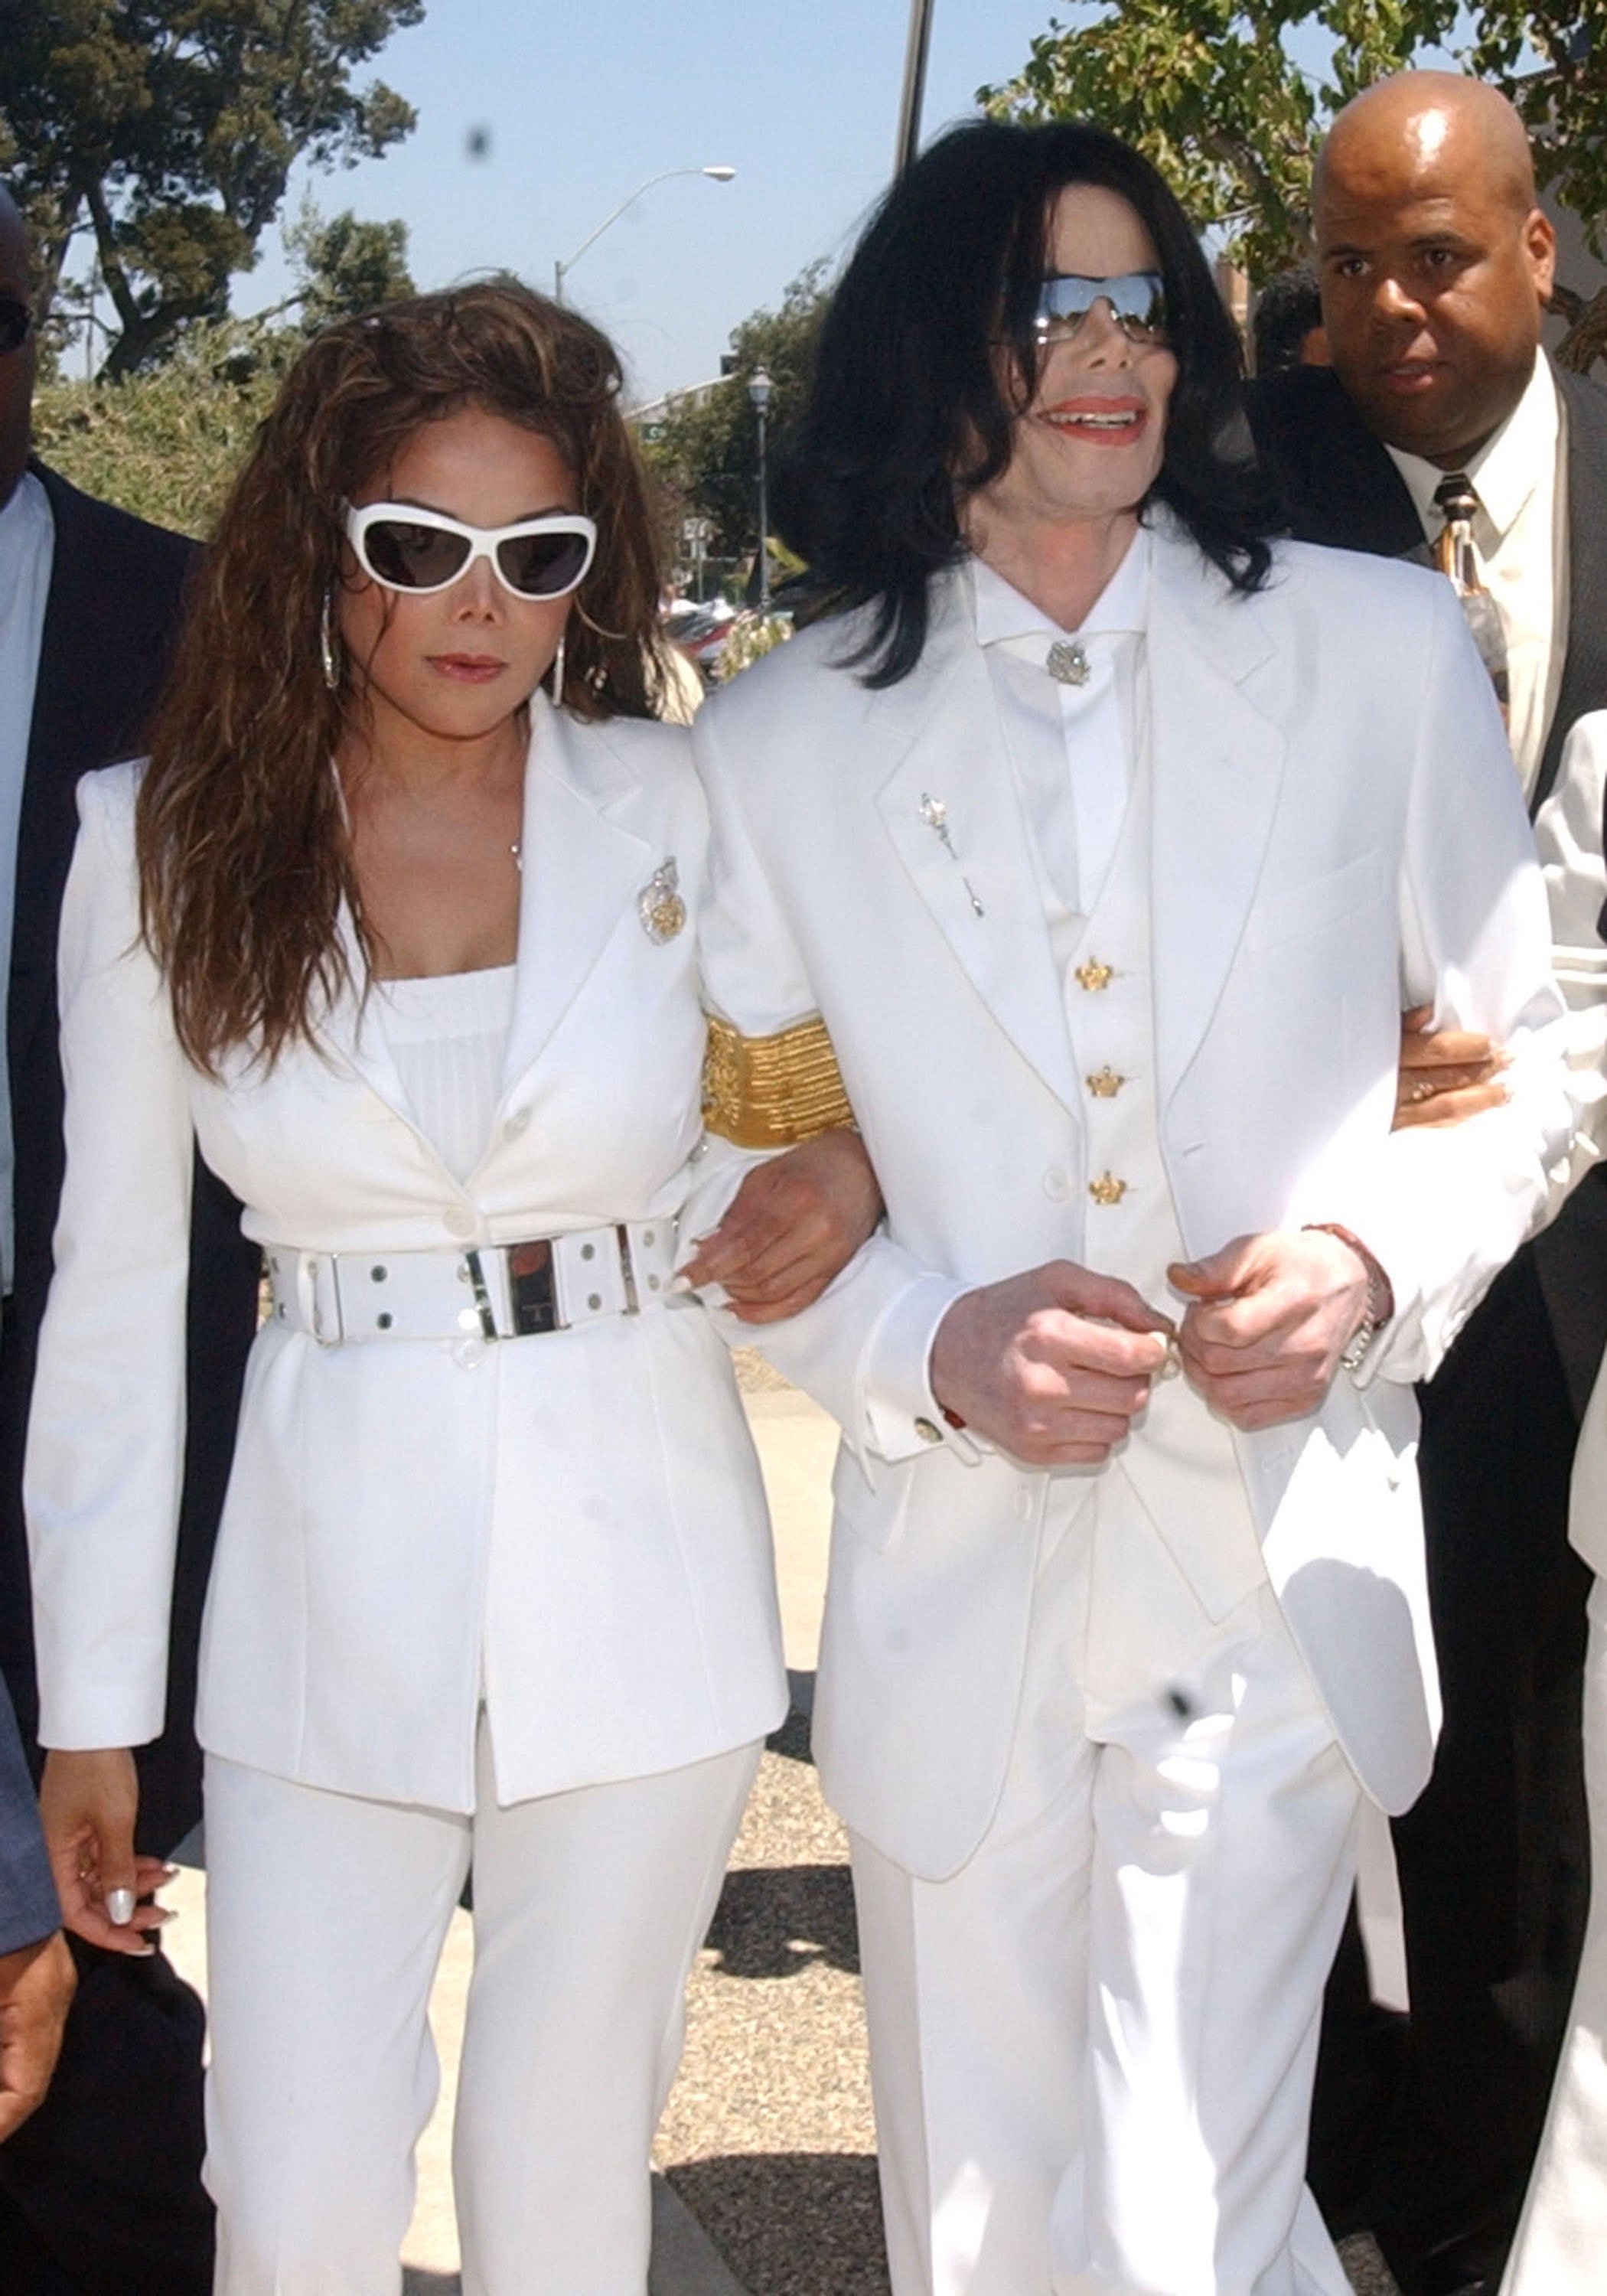 Michael Jackson and LaToya Jackson during the evidentiary hearing in the Michael Jackson child molestation case August 16, 2004. | Photo: GettyImages